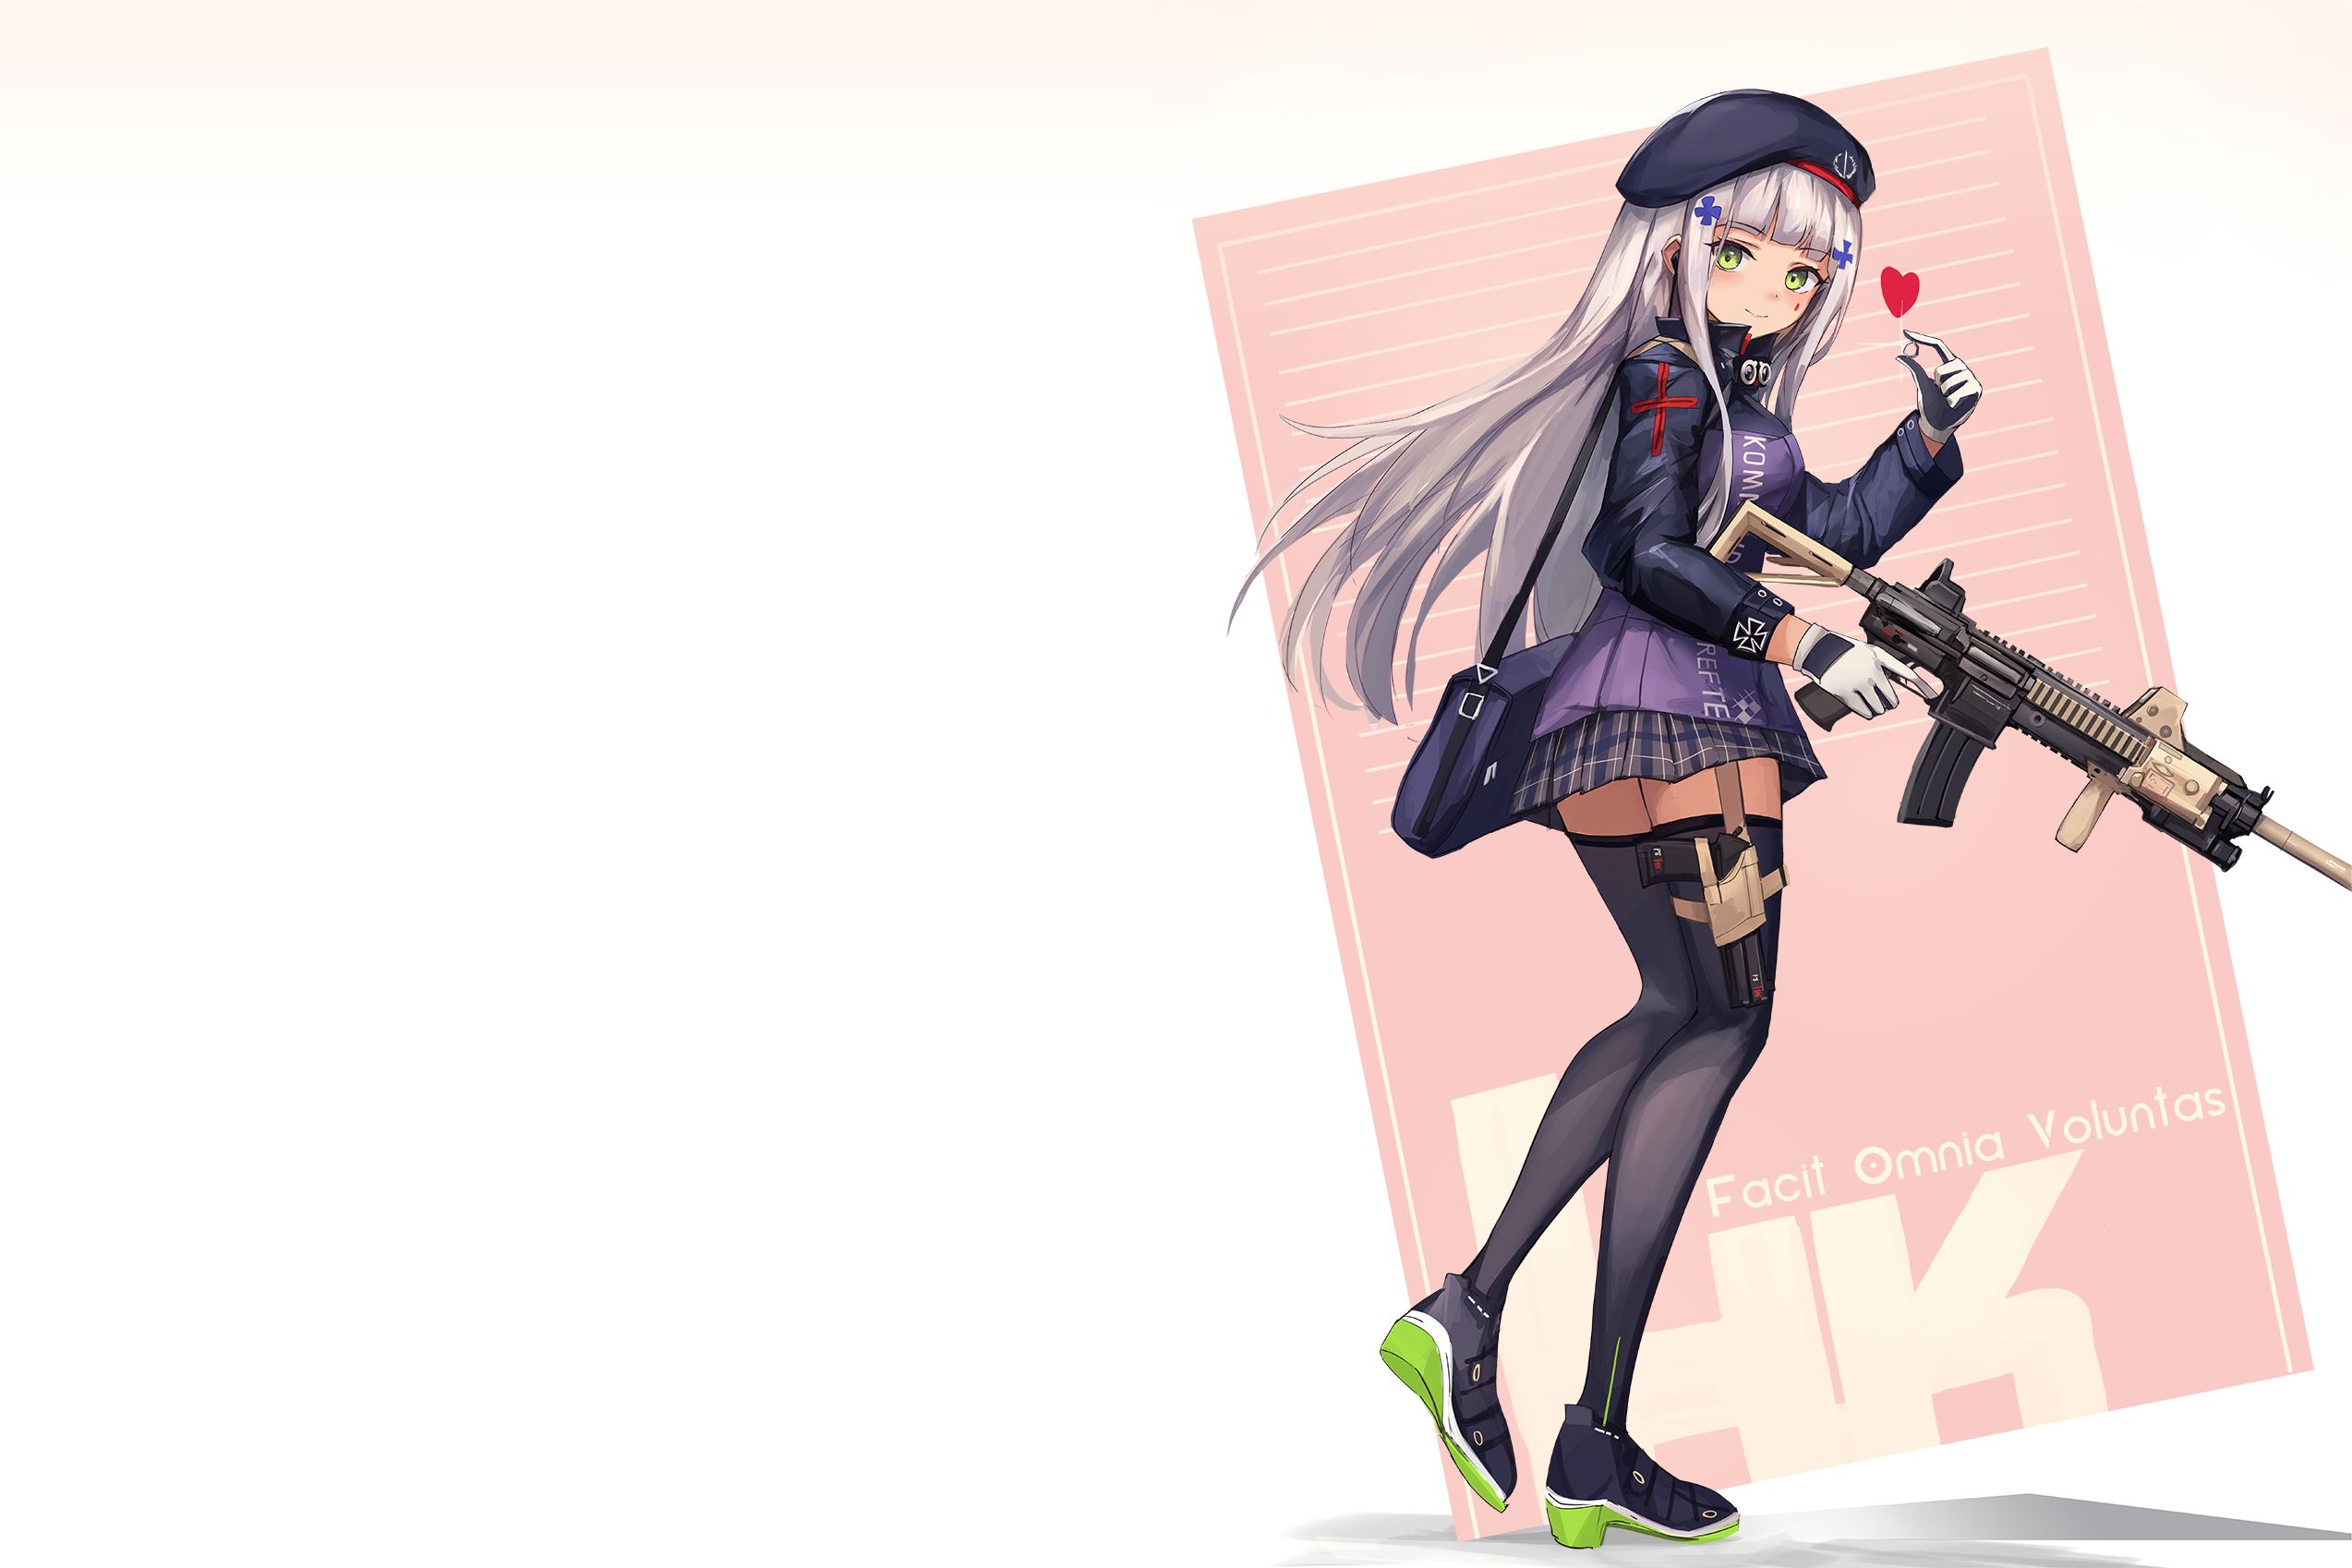 HK416 Wallpaper: Elevate Your Device with This Striking Design